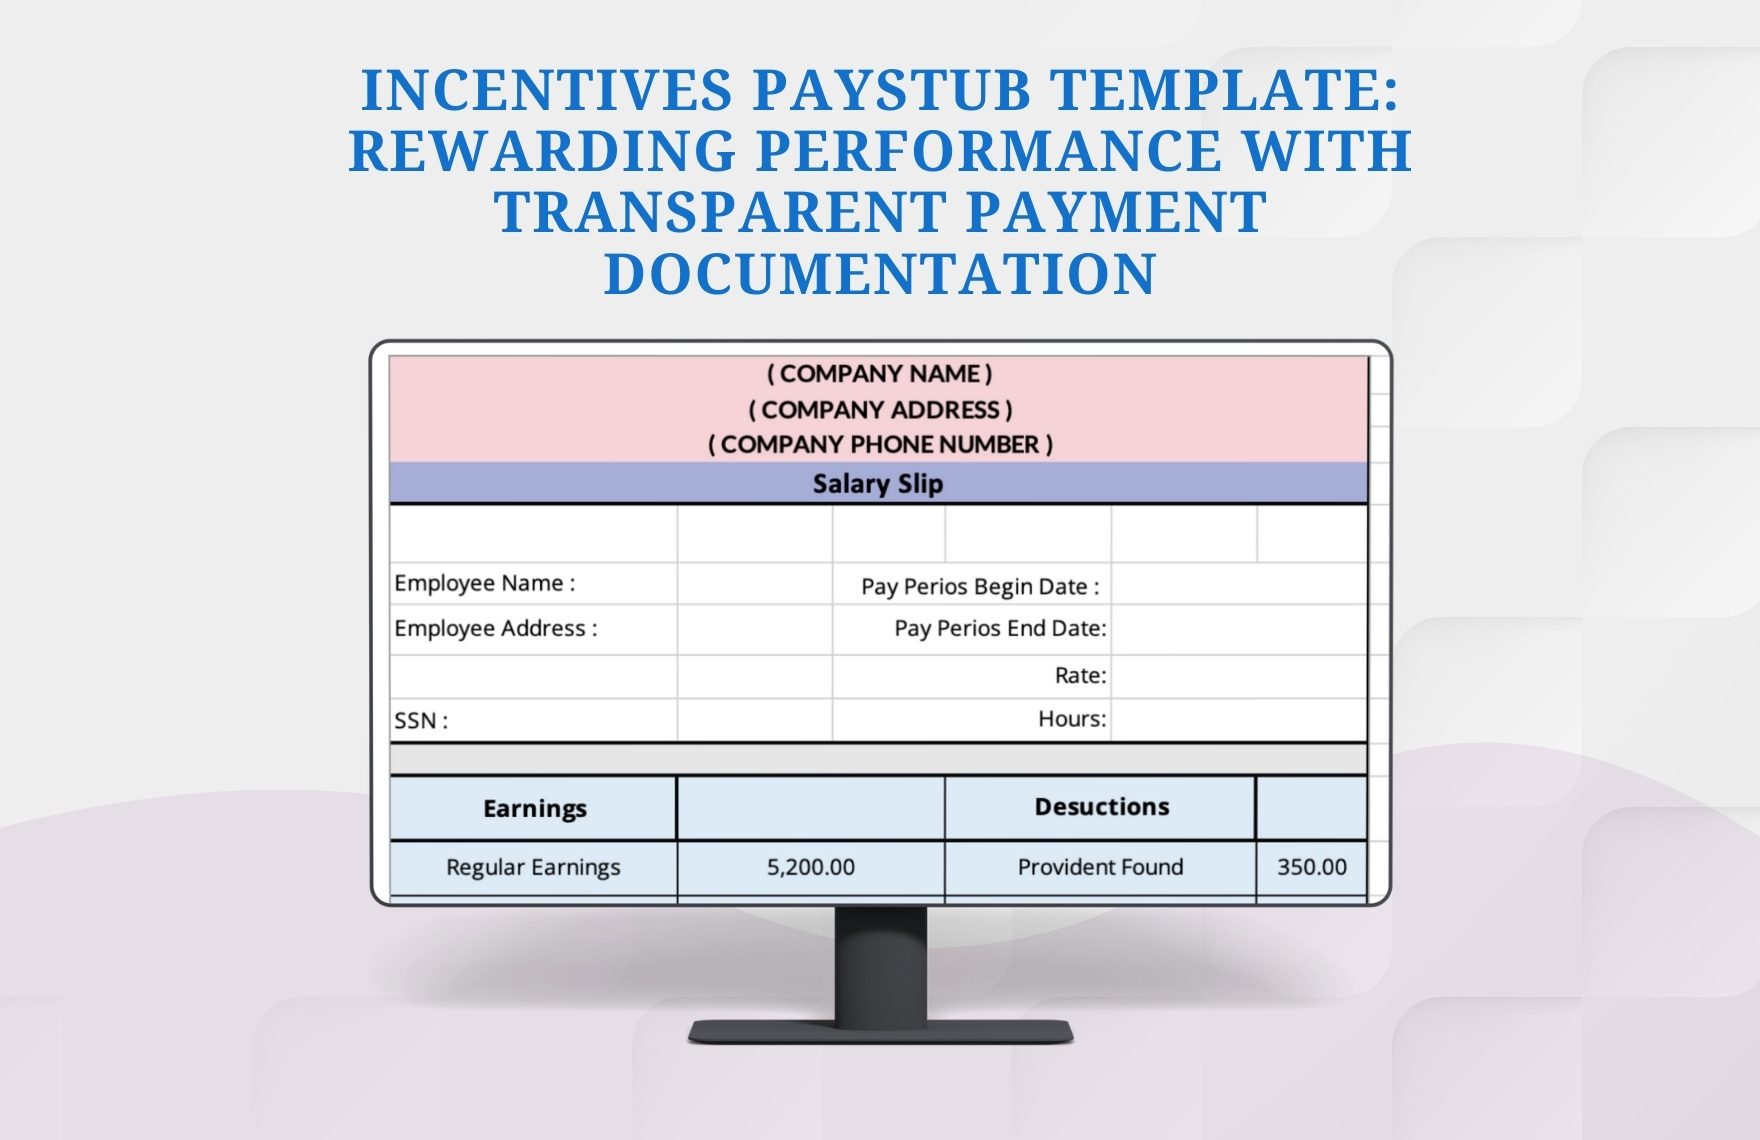 Incentives Paystub Template